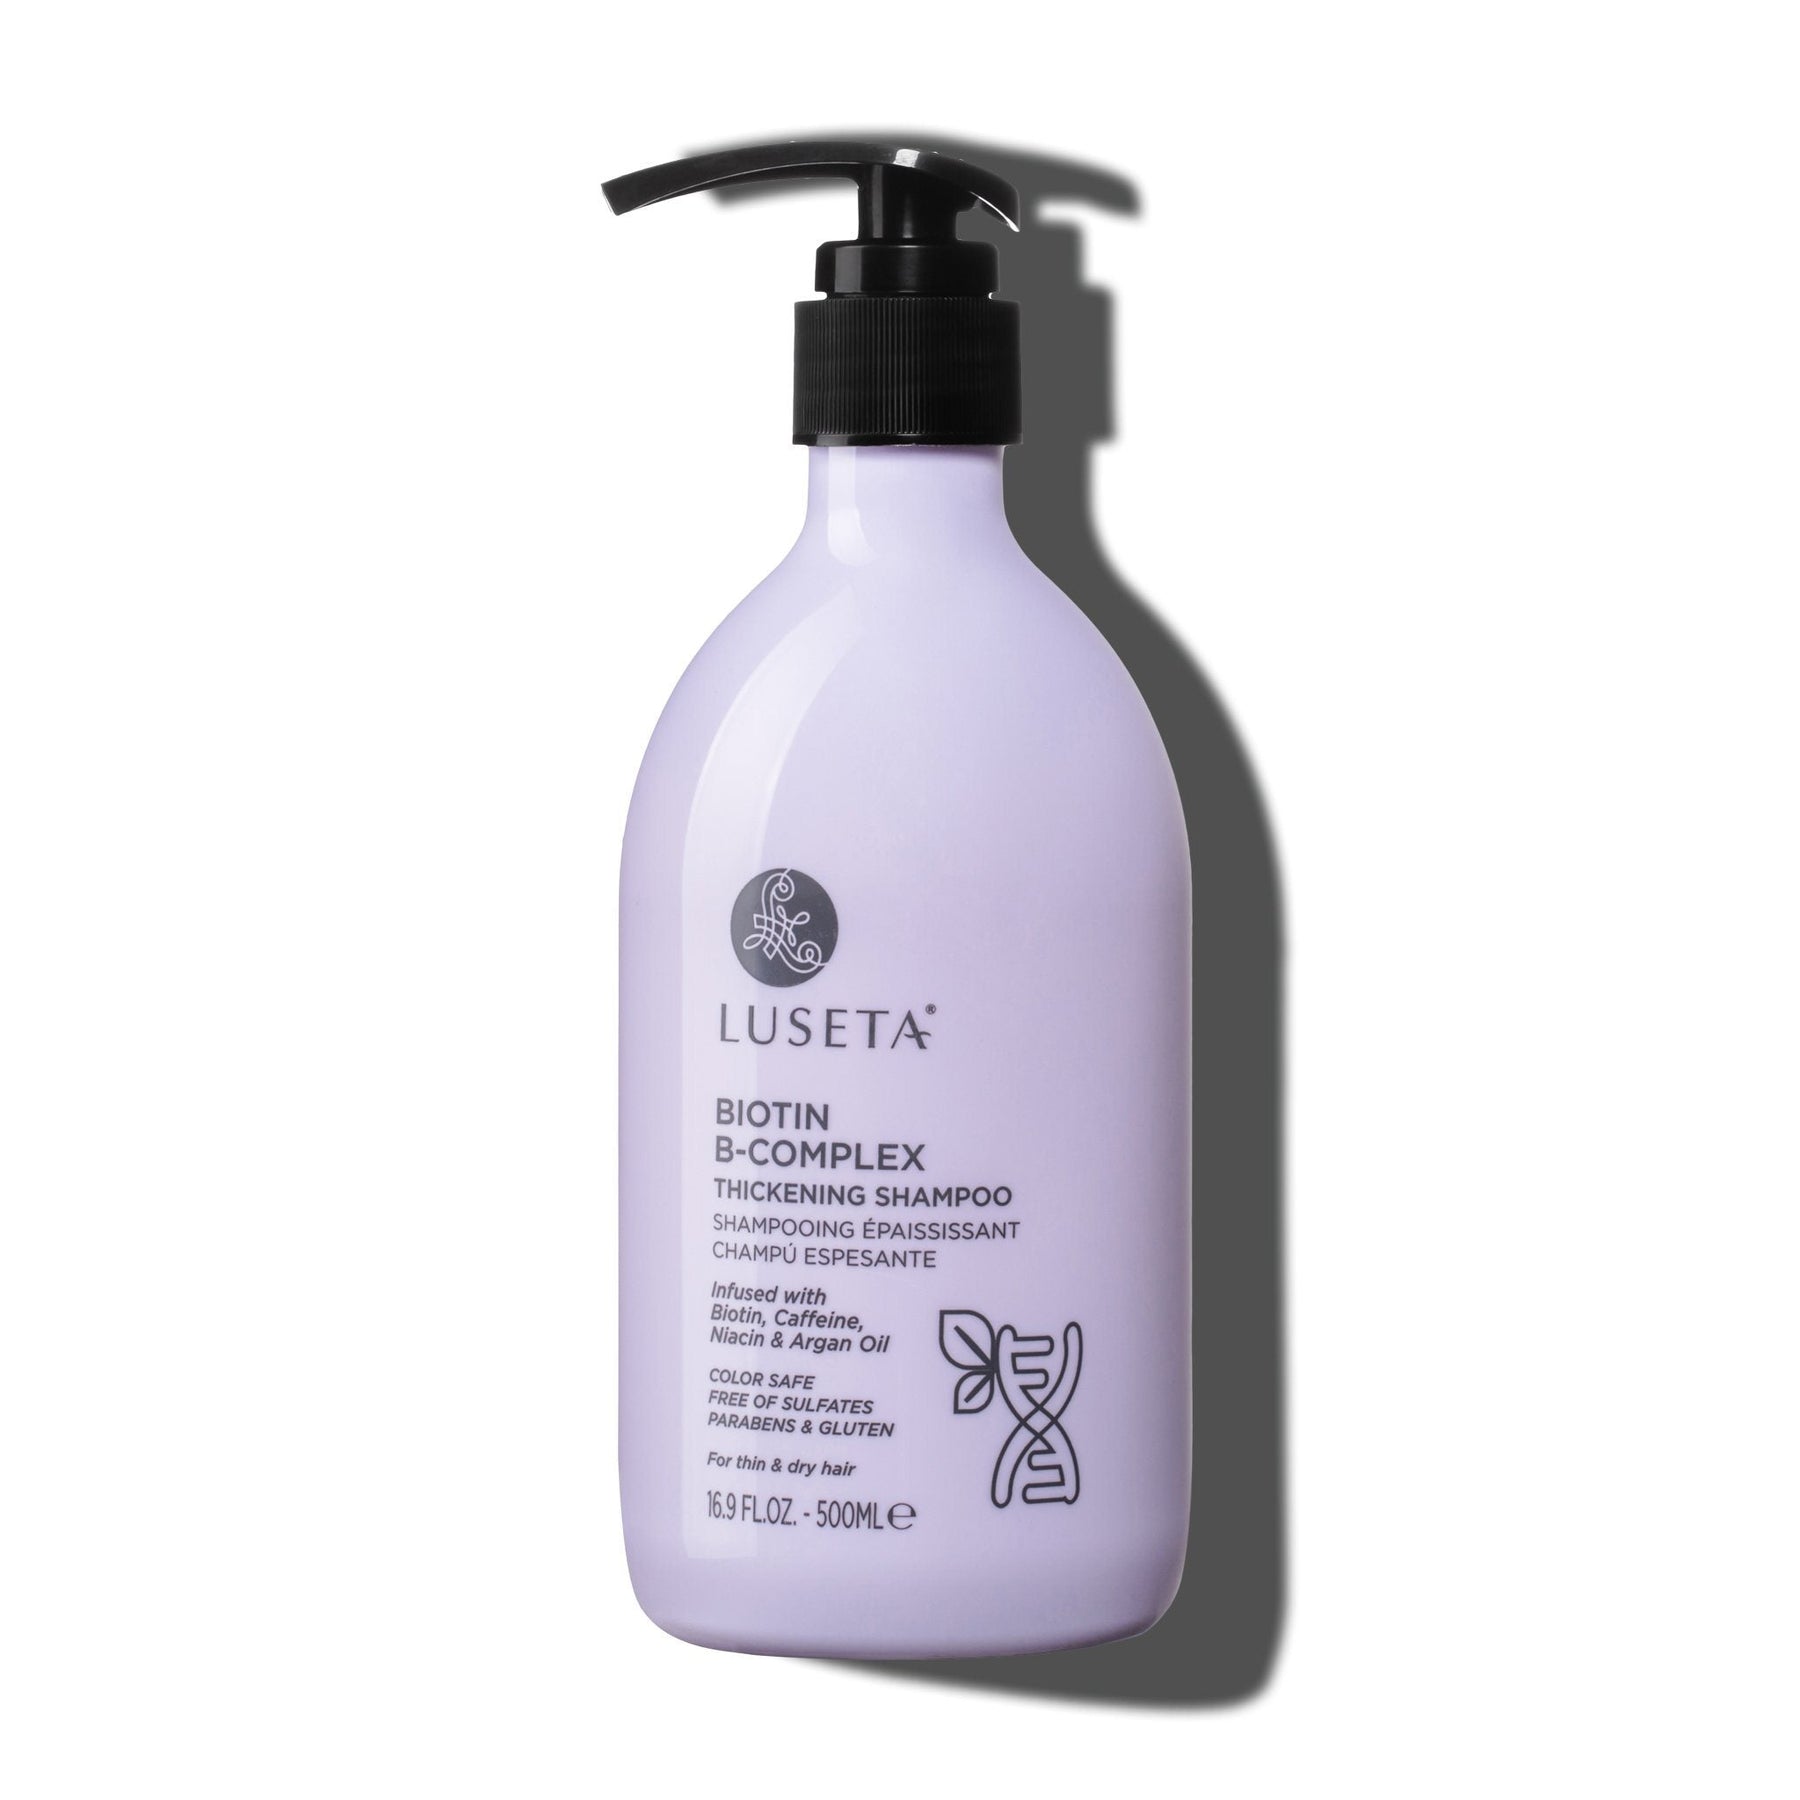 Biotin B-Complex Thickening Shampoo - by Luseta Beauty |ProCare Outlet|